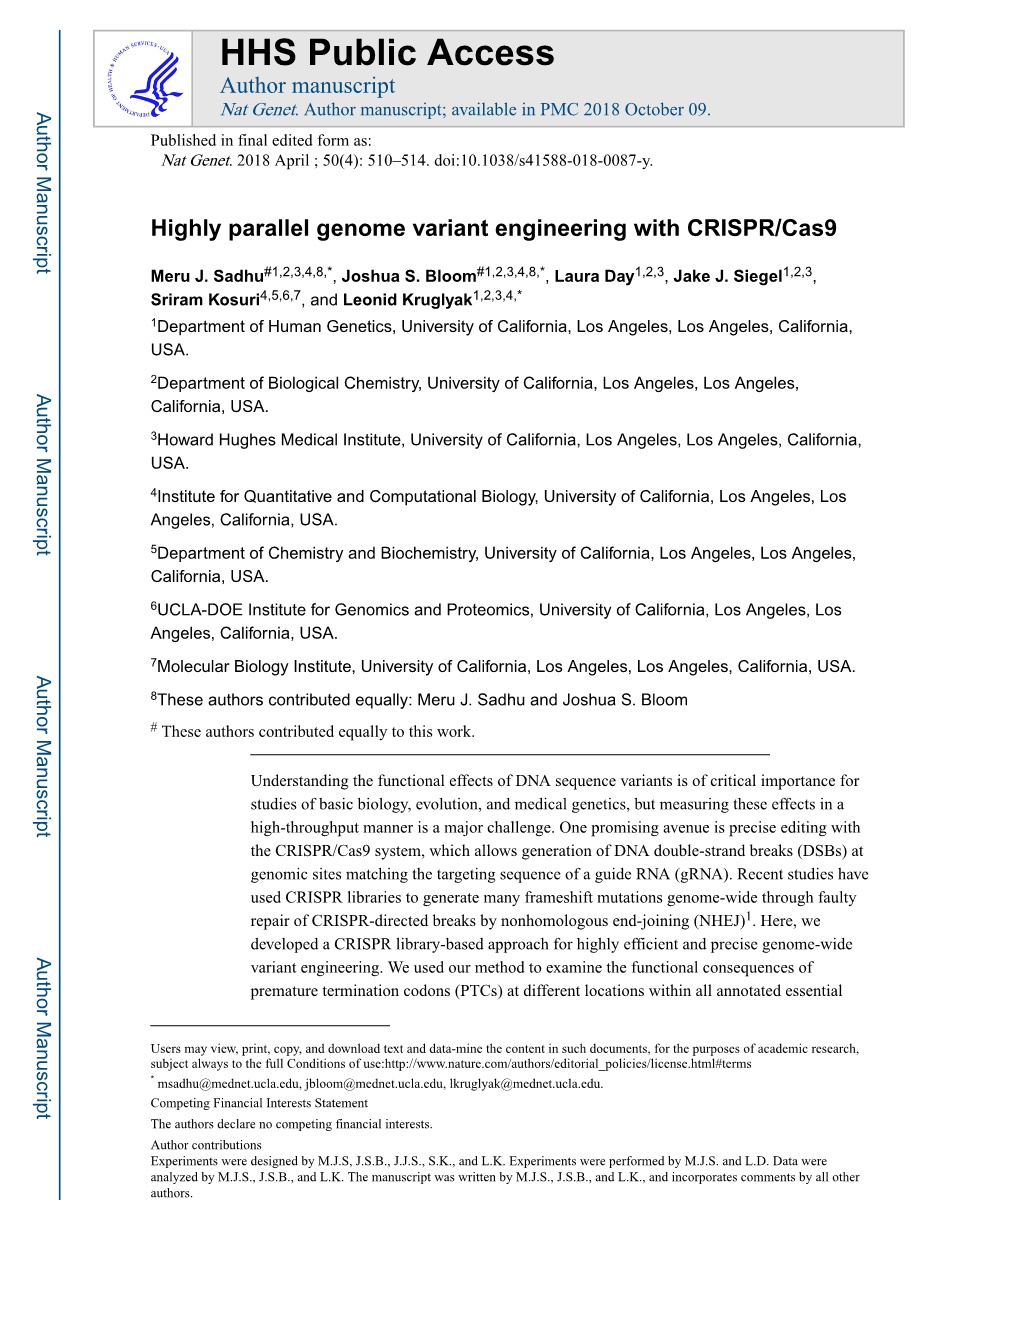 Highly Parallel Genome Variant Engineering with CRISPR/Cas9